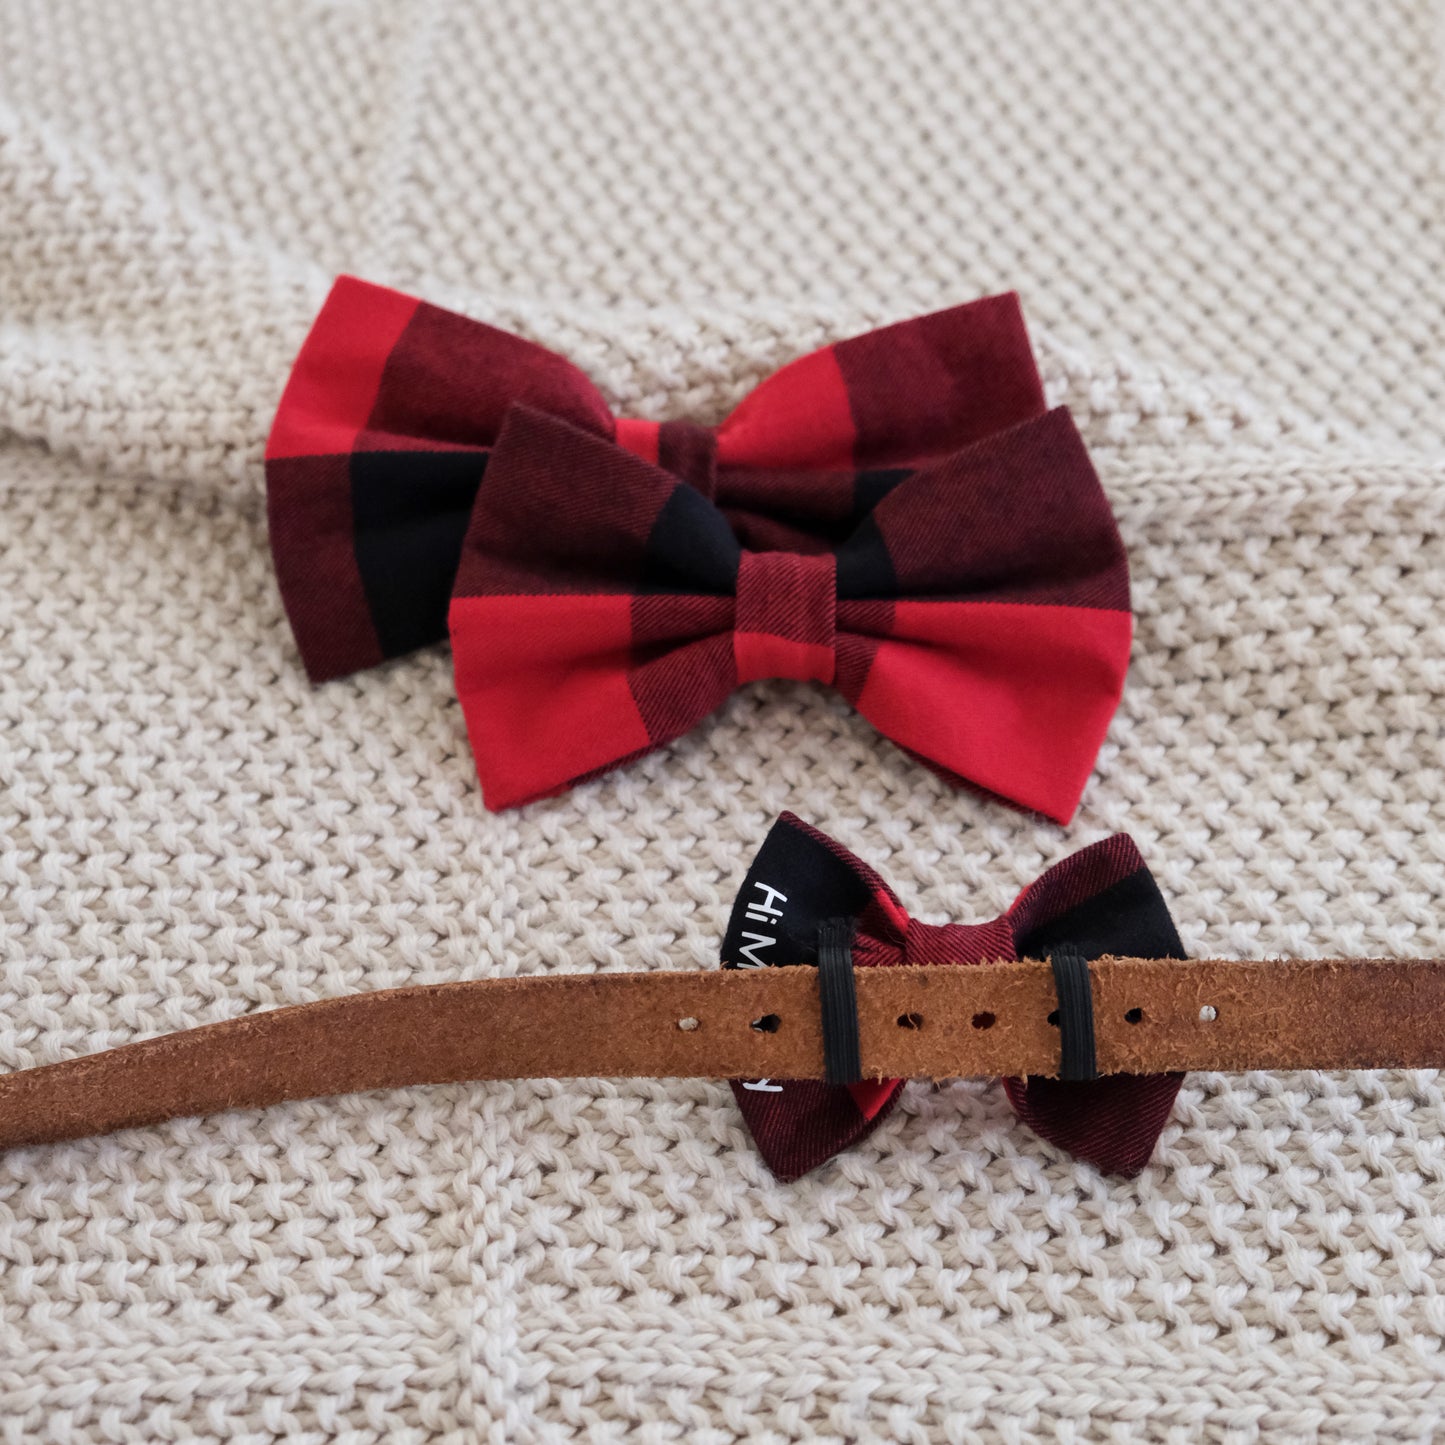 Red Plaid Bow Tie